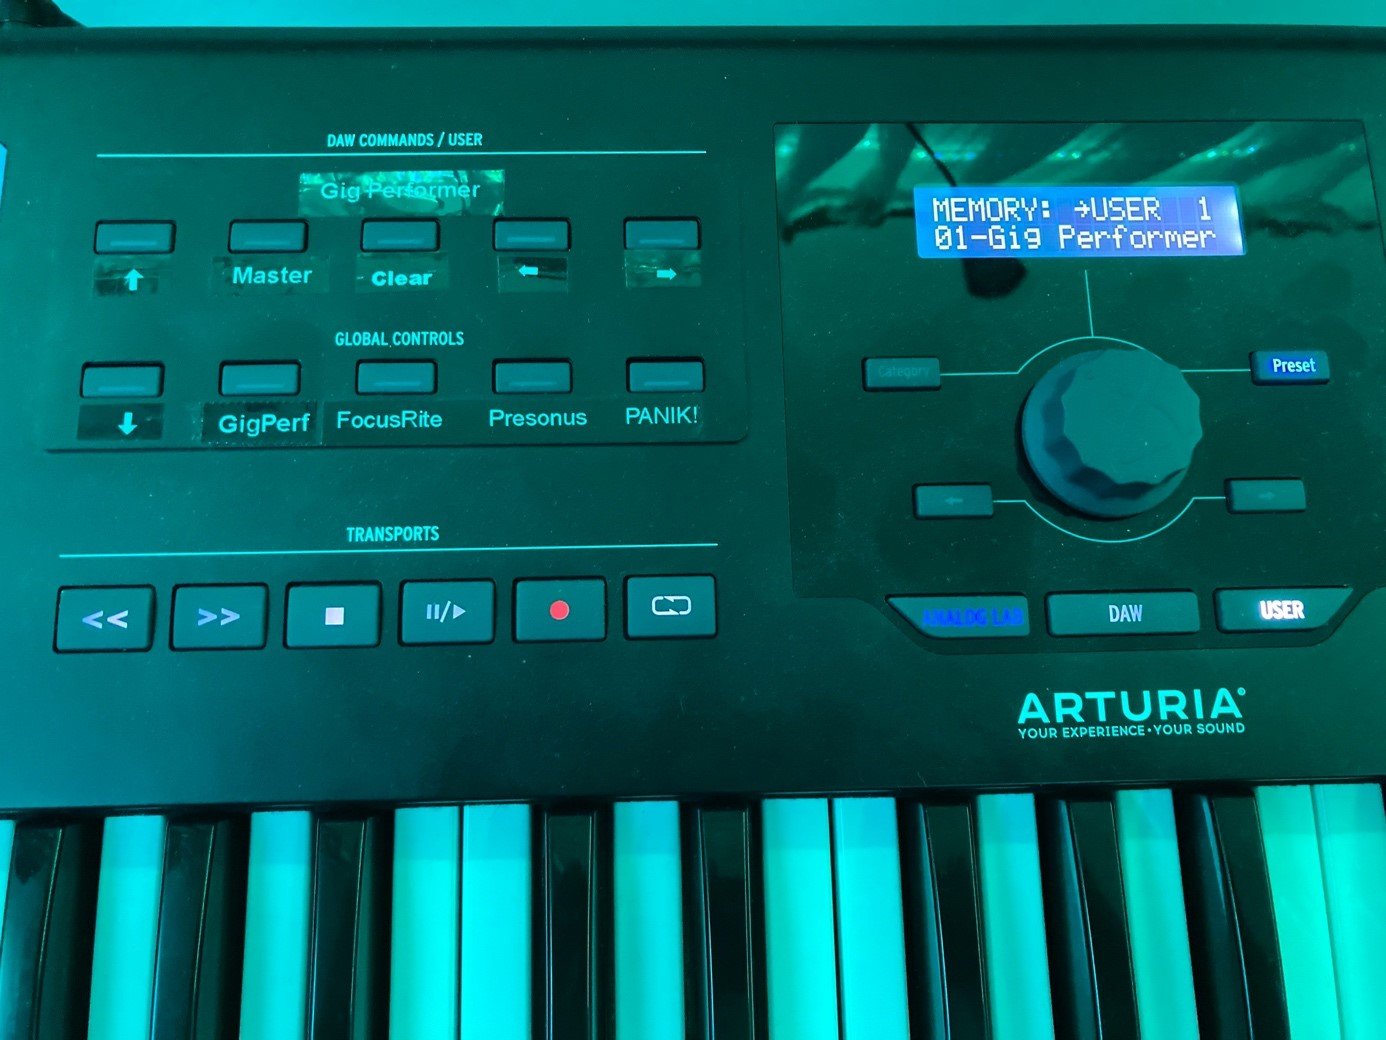 KeyLab MkII I with some dedicated buttons to control Gig Performer, OnSong and script based actions (to bring Gig Performer, PreSonus Mixer App to front of the screen)